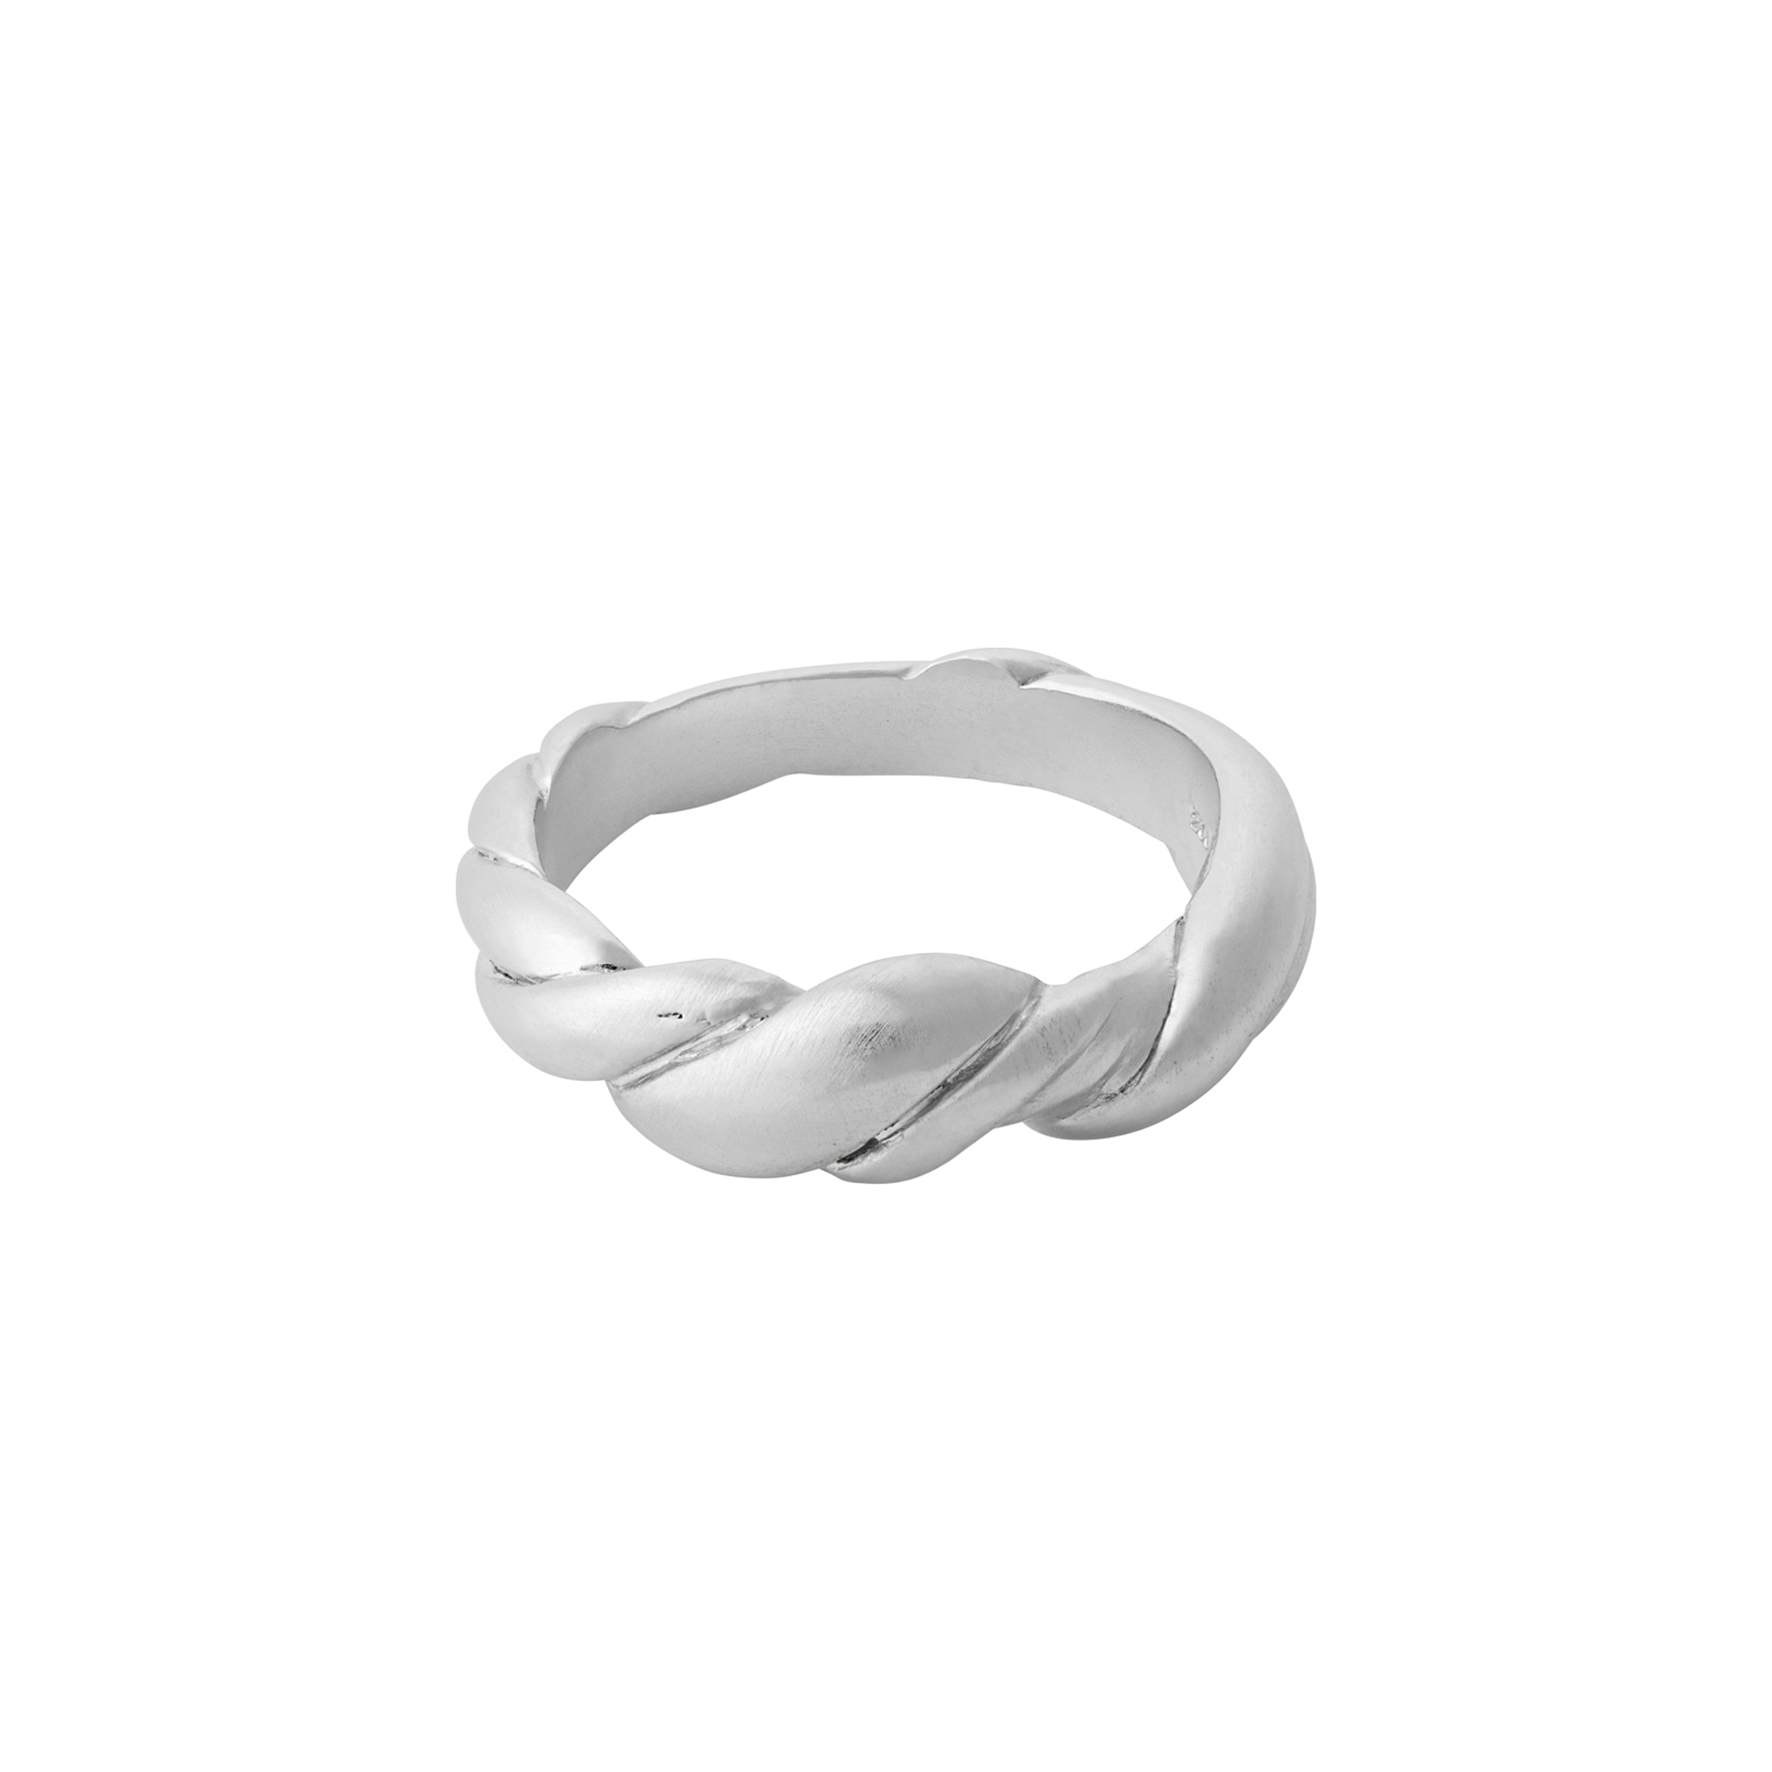 Hana Ring from Pernille Corydon in Silver Sterling 925